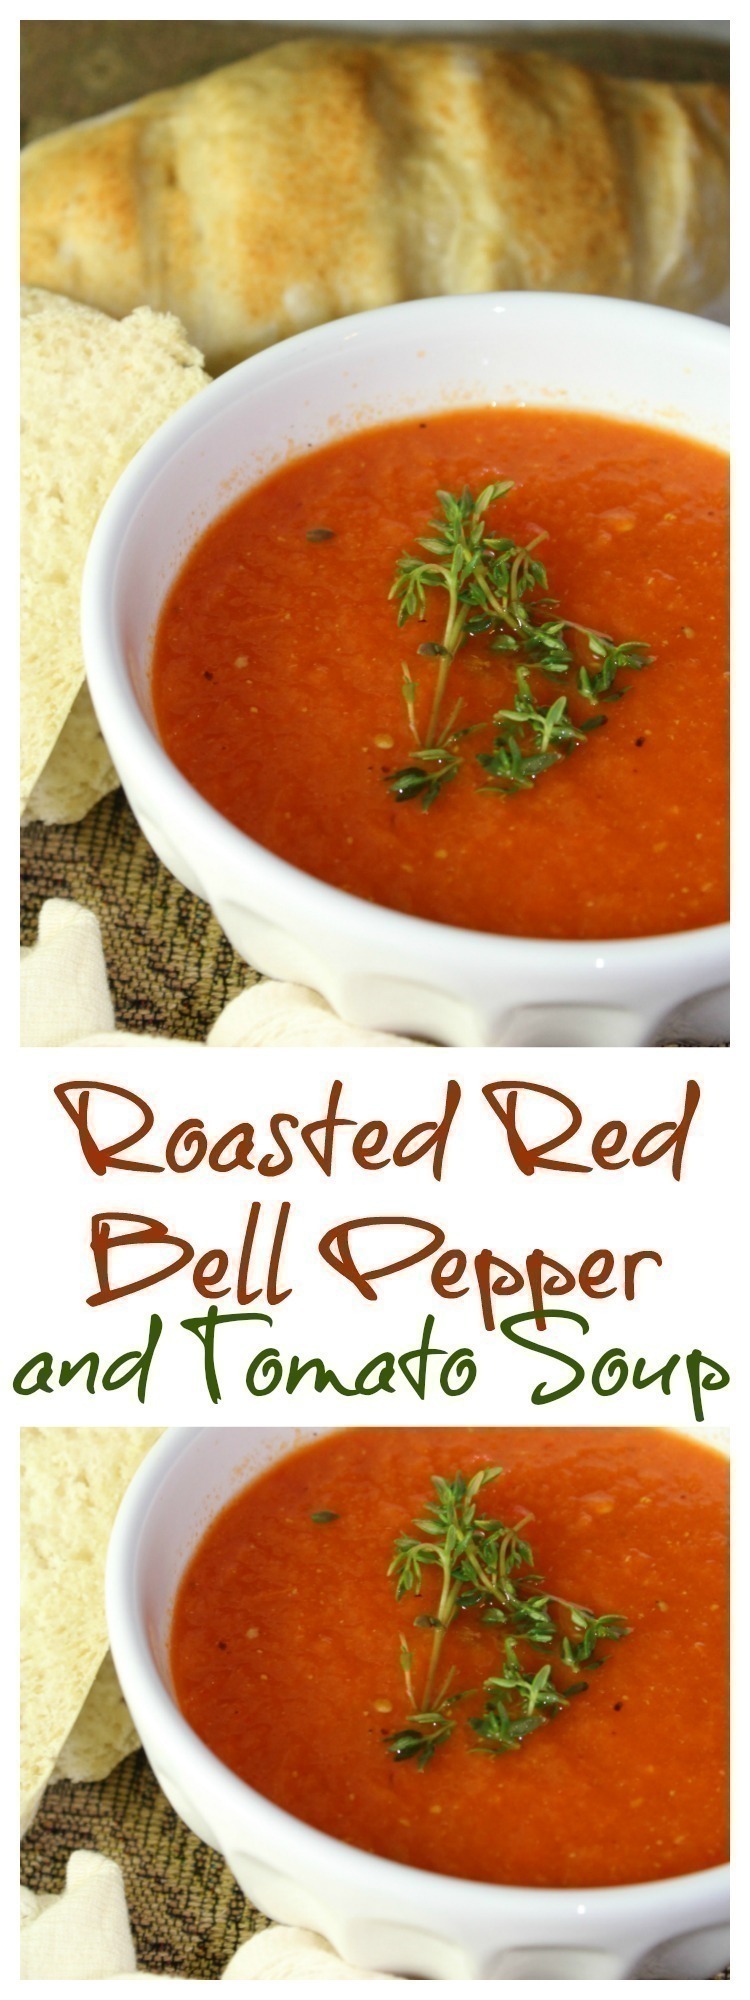 A simple recipe that comes roasted bell peppers and tomatoes with onions and garlic to make a simple & satisfying soup!